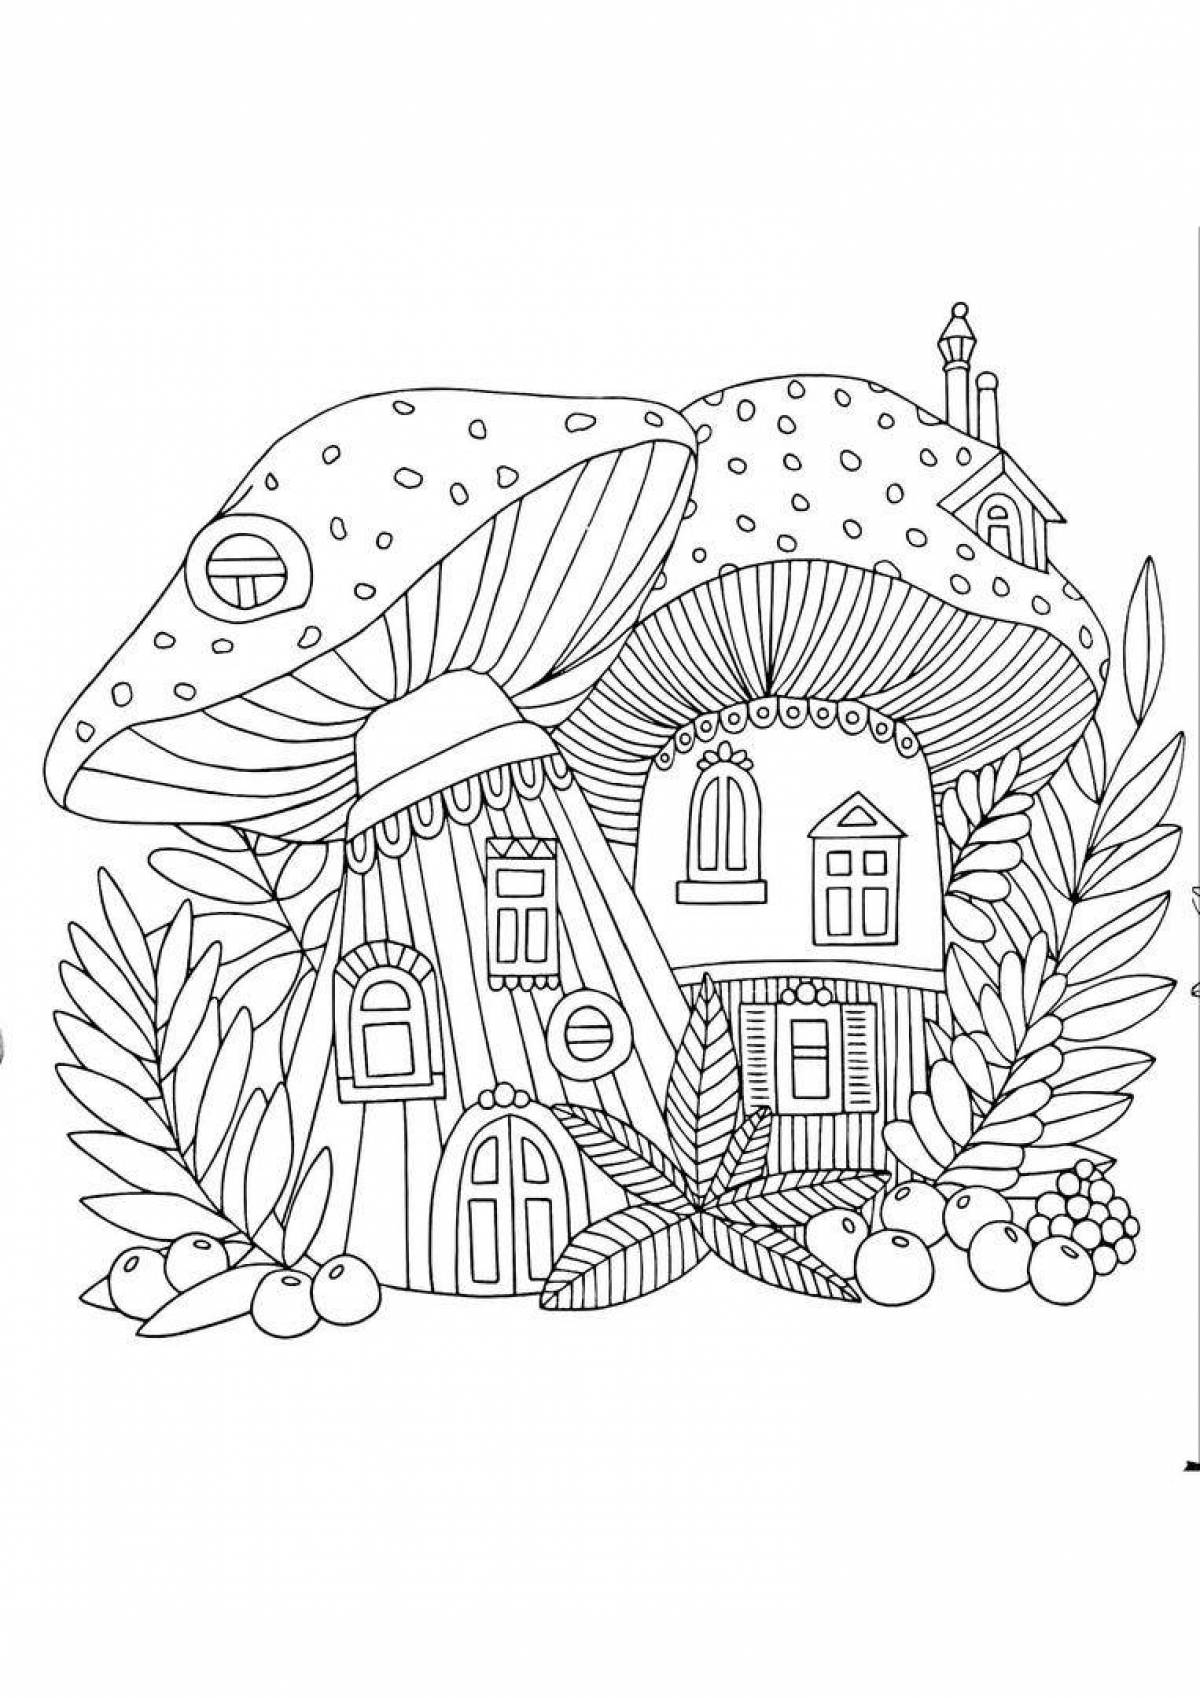 Coloring book glowing houses and flowers